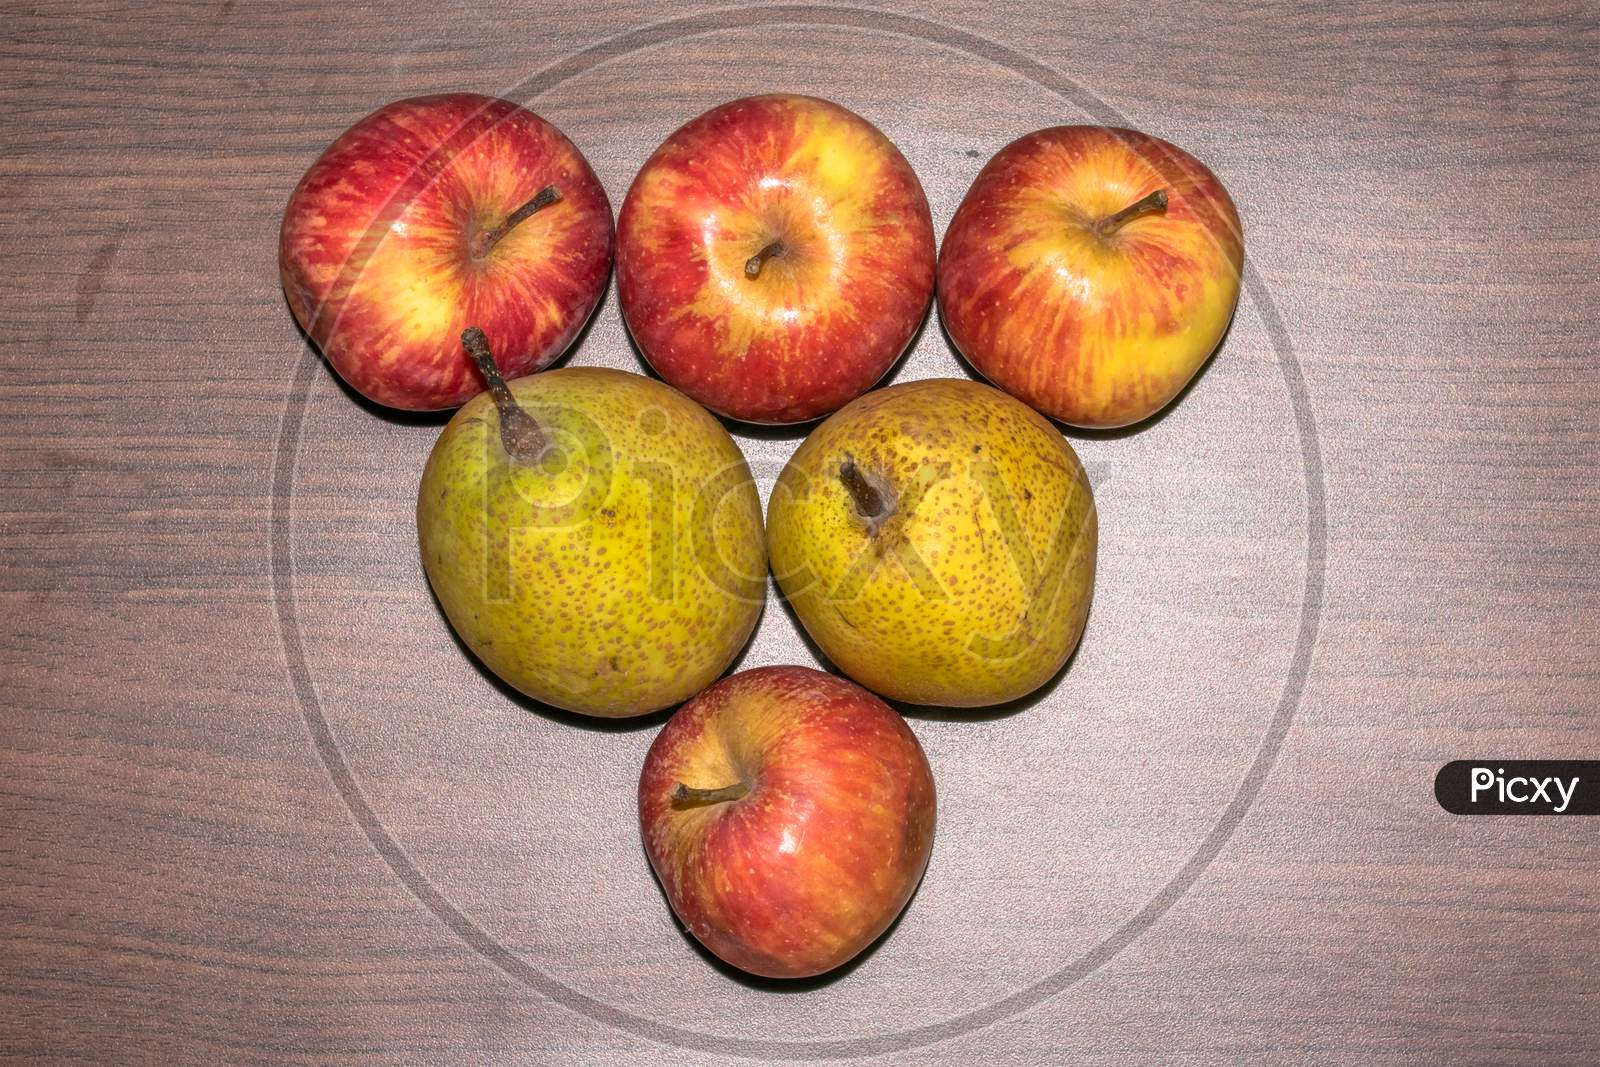 Healthy tasty juicy apples and pears arranged on a brown wooden board